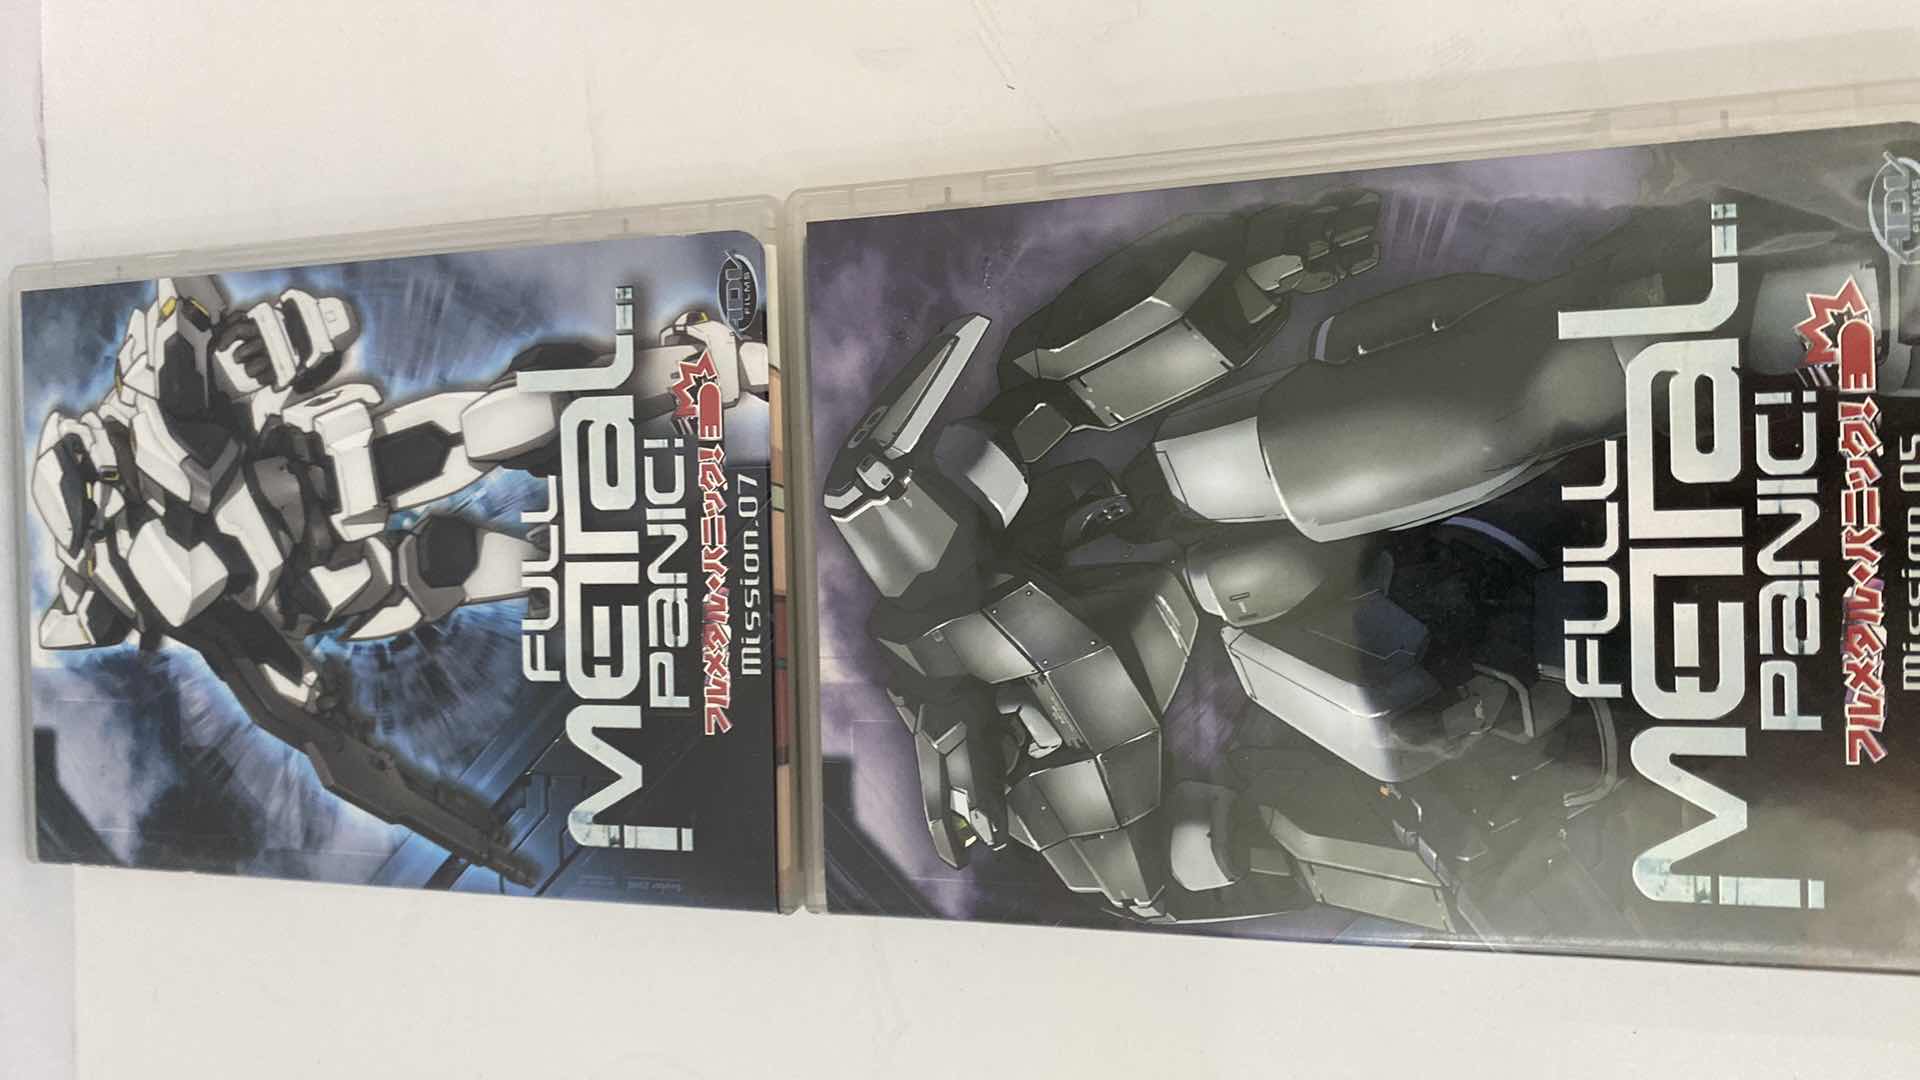 Photo 4 of 7 DVDS - SERIES FULL METAL PANIC MISSION 1-7